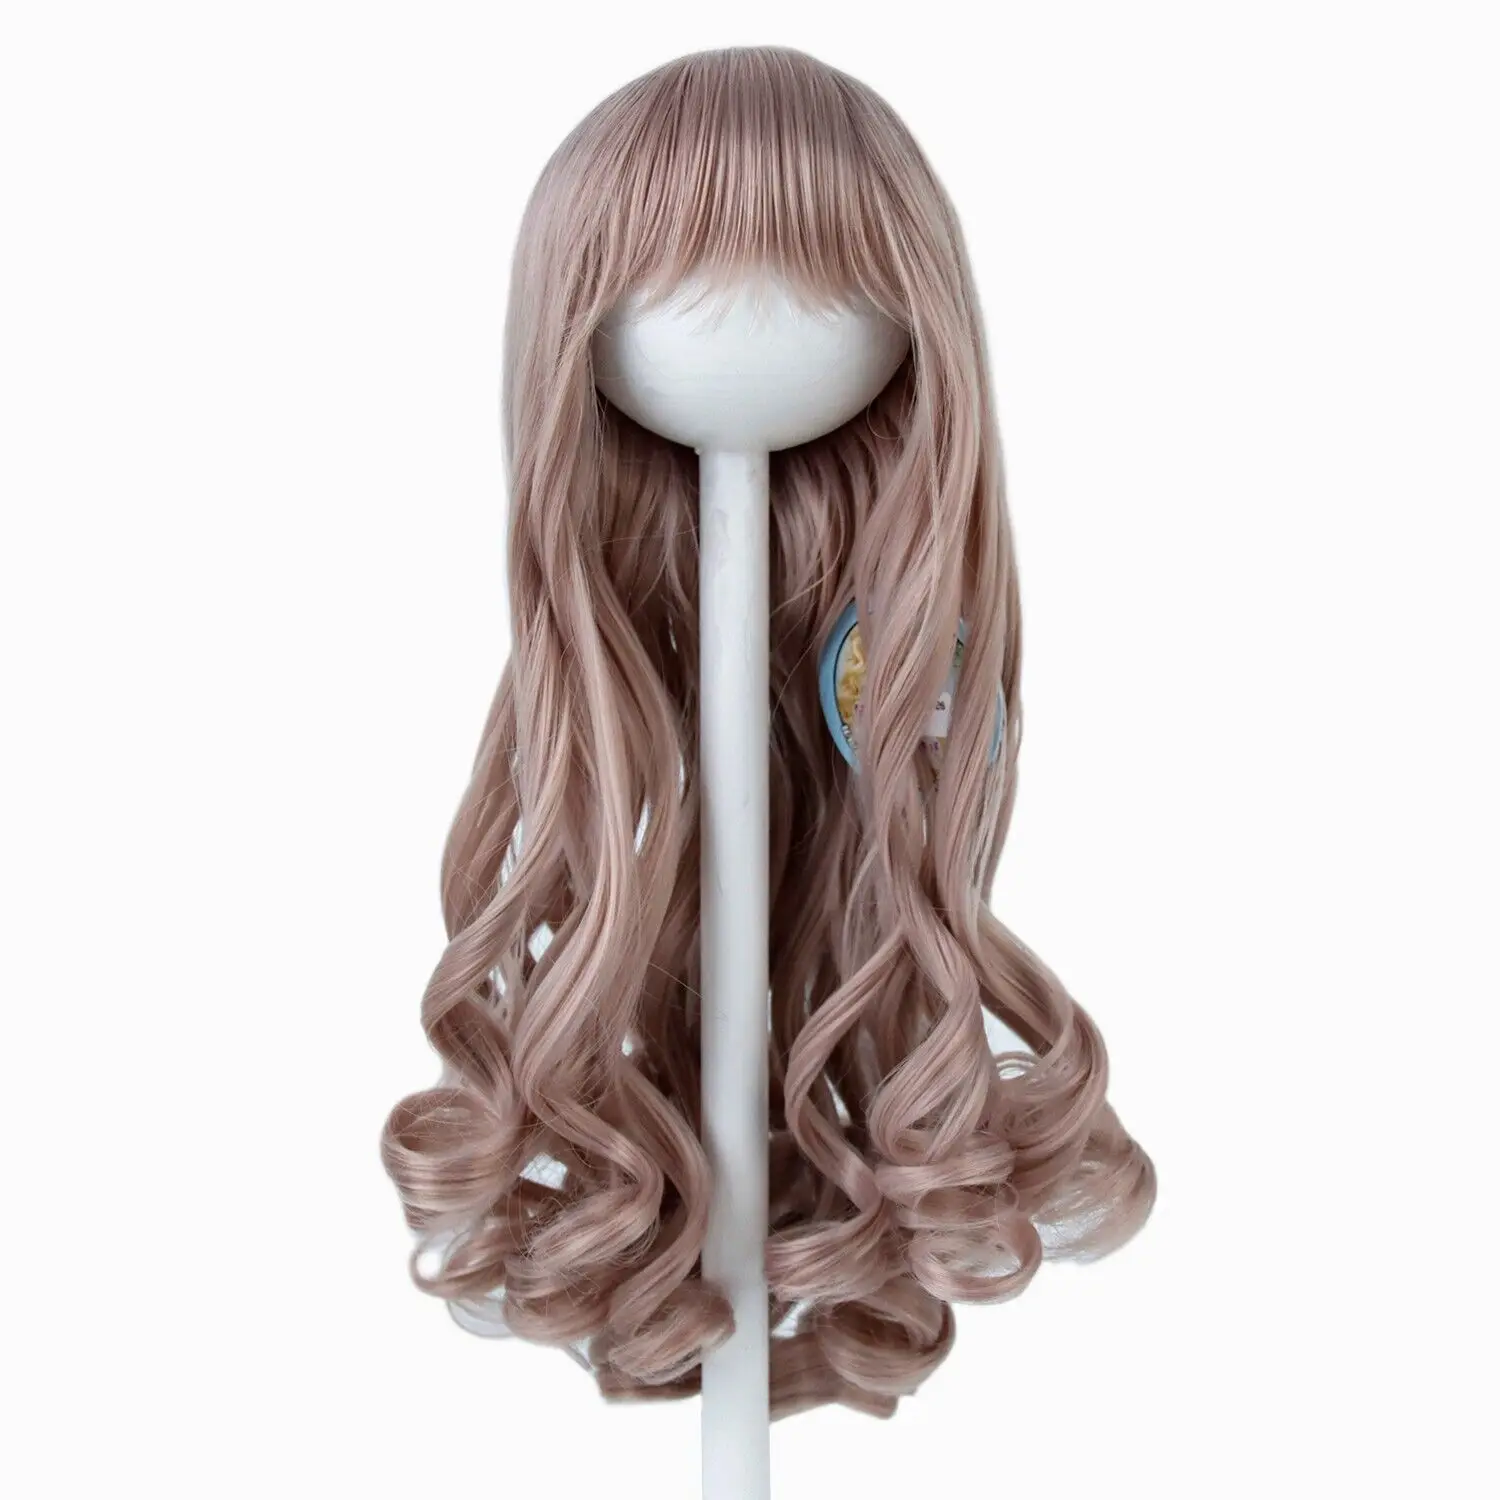 18'' American Doll Wigs Long Curly Coffe Colour With Bangs Hair For Girls Doll Wig 26-28cm head circumference aidolla doll accessories 1 3 bjd doll wig middle length bangs straight hair blue high temperature fiber wig for diy bjd doll